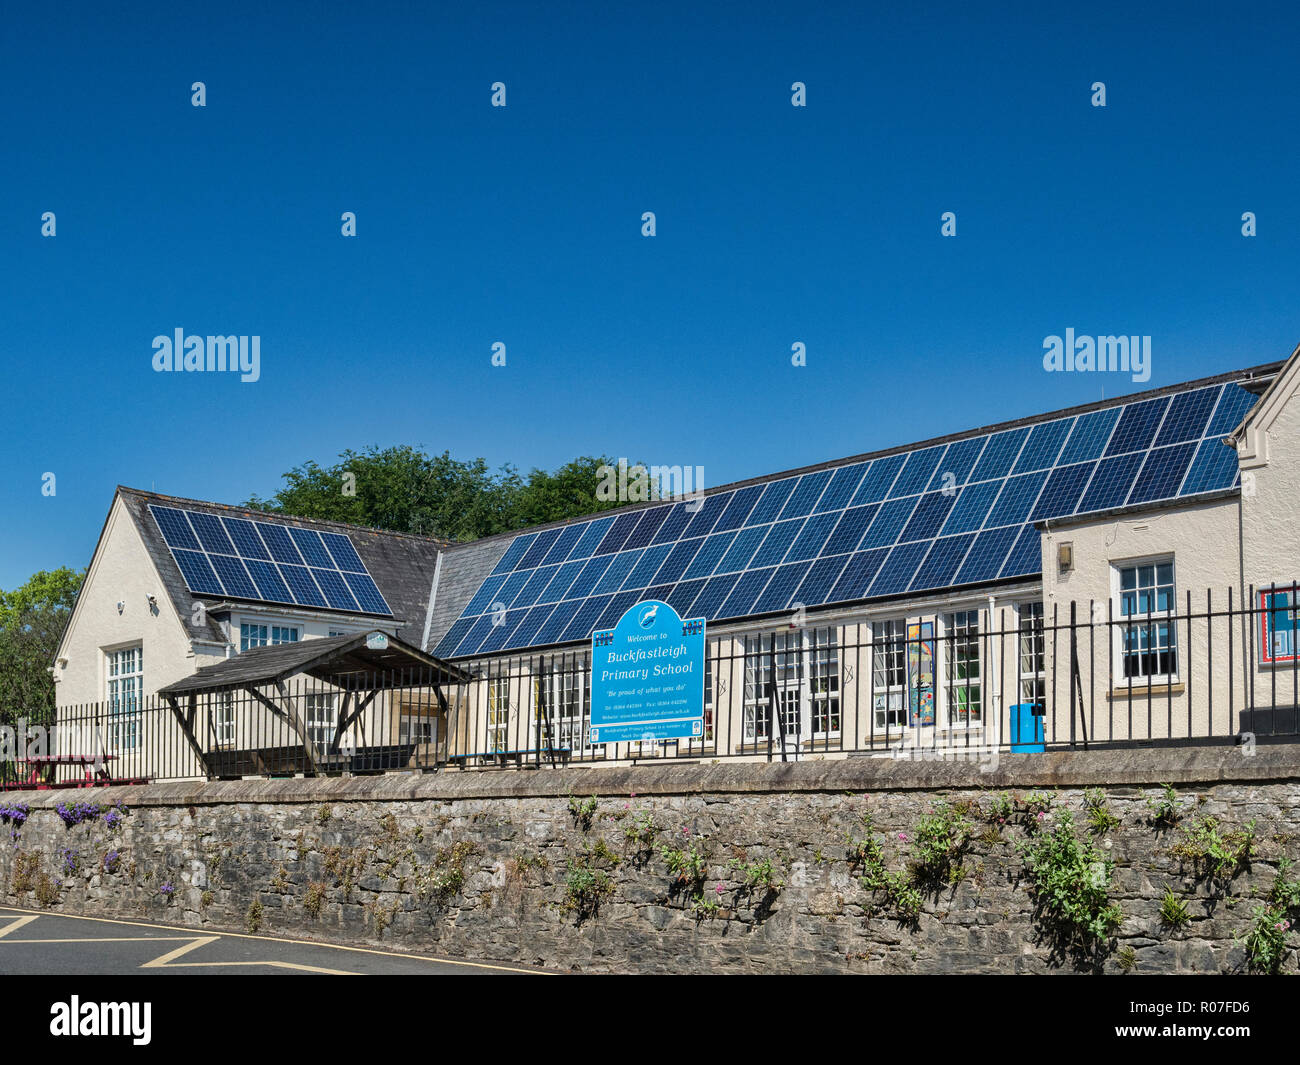 28 May 2018: Buckfastleigh,Devon, UK - Buckfastleigh Primary School, with its roof covered in solar panels. Stock Photo